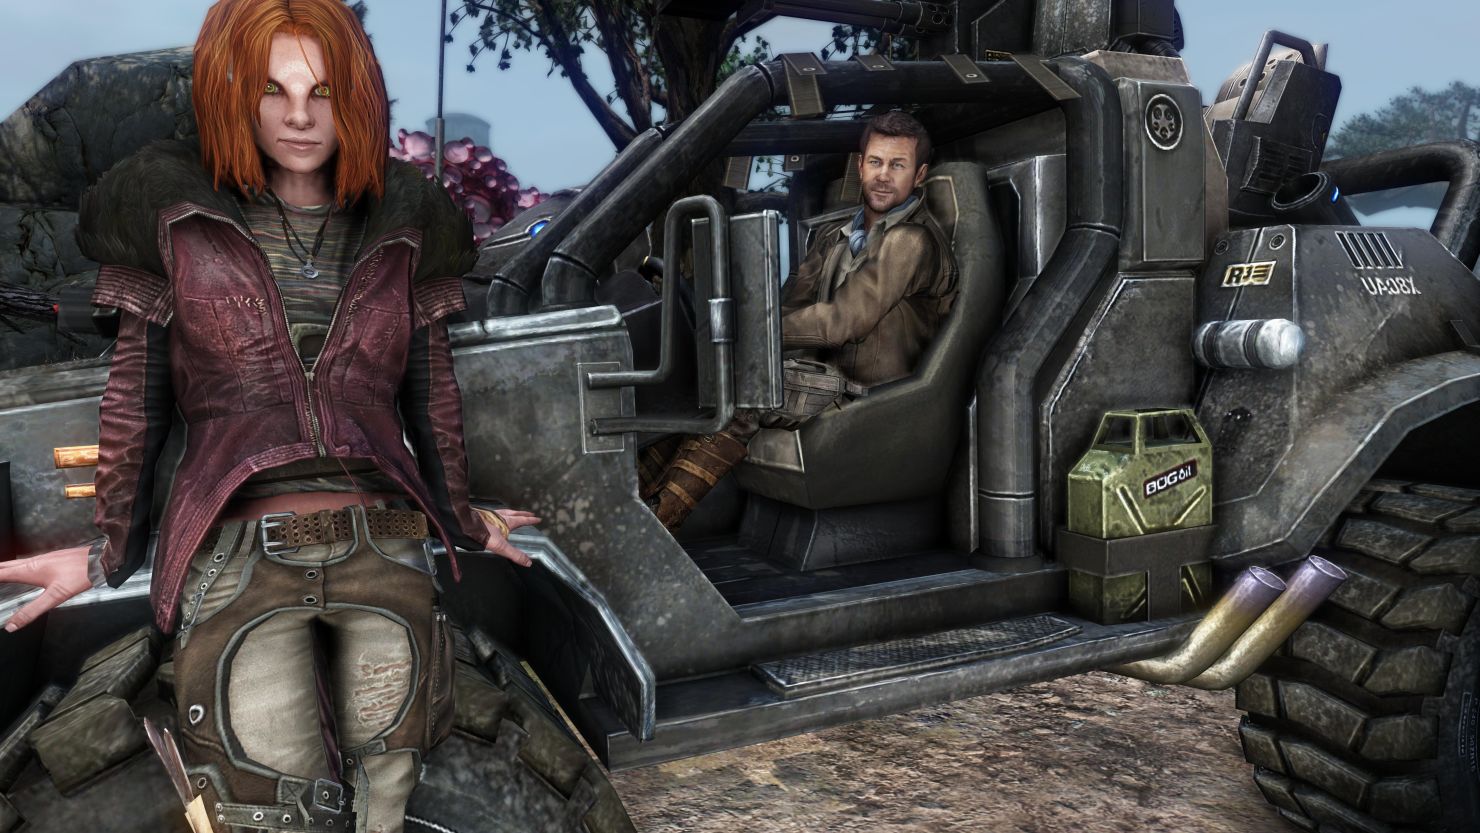 The characters Irisa, left, and Joshua Nolan appear both in the "Defiance" video game and on the Syfy show of the same name.